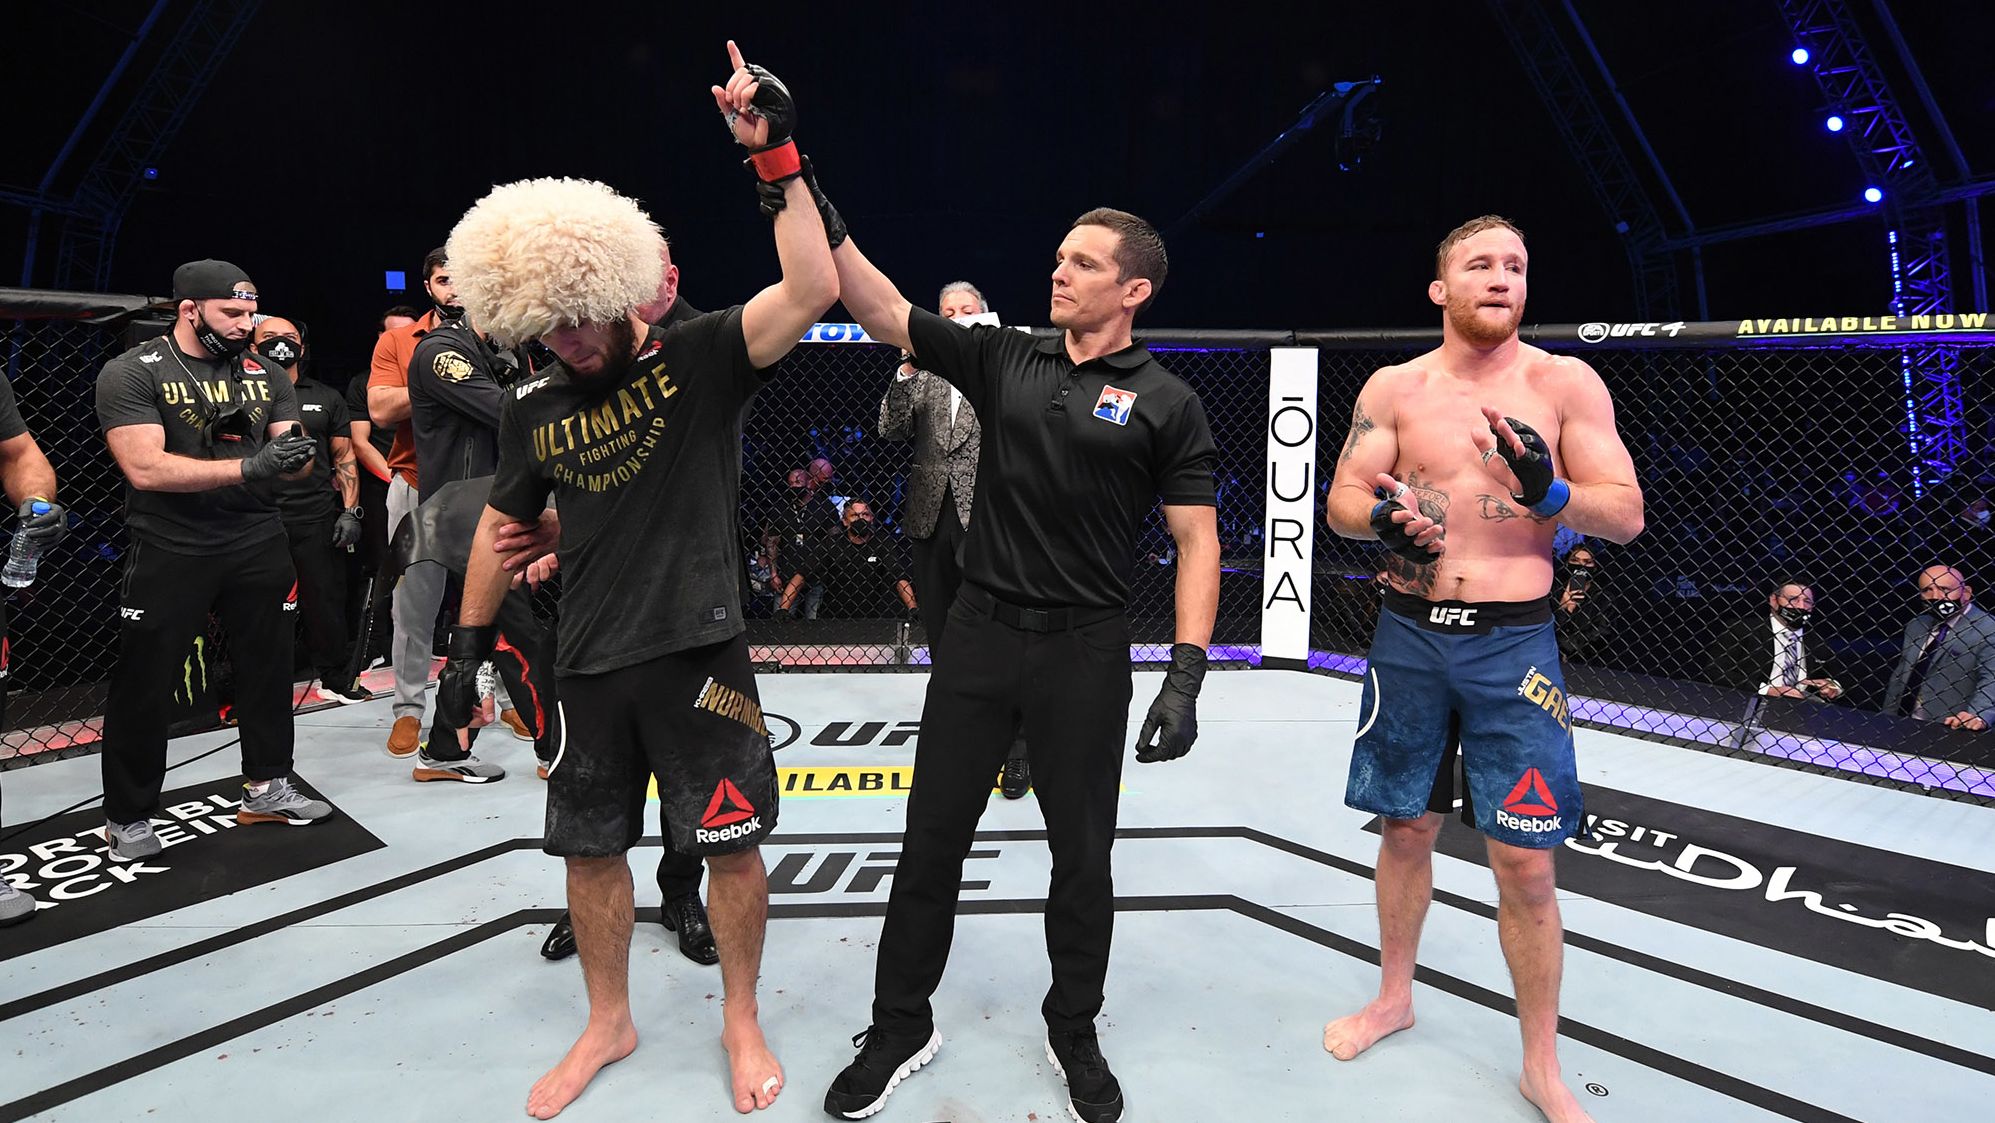 Khabib Nurmagomedov of Russia, left, celebrates his victory over Justin Gaethje in their lightweight title bout on Saturday, October 25, on UFC Fight Island, Abu Dhabi, United Arab Emirates. 